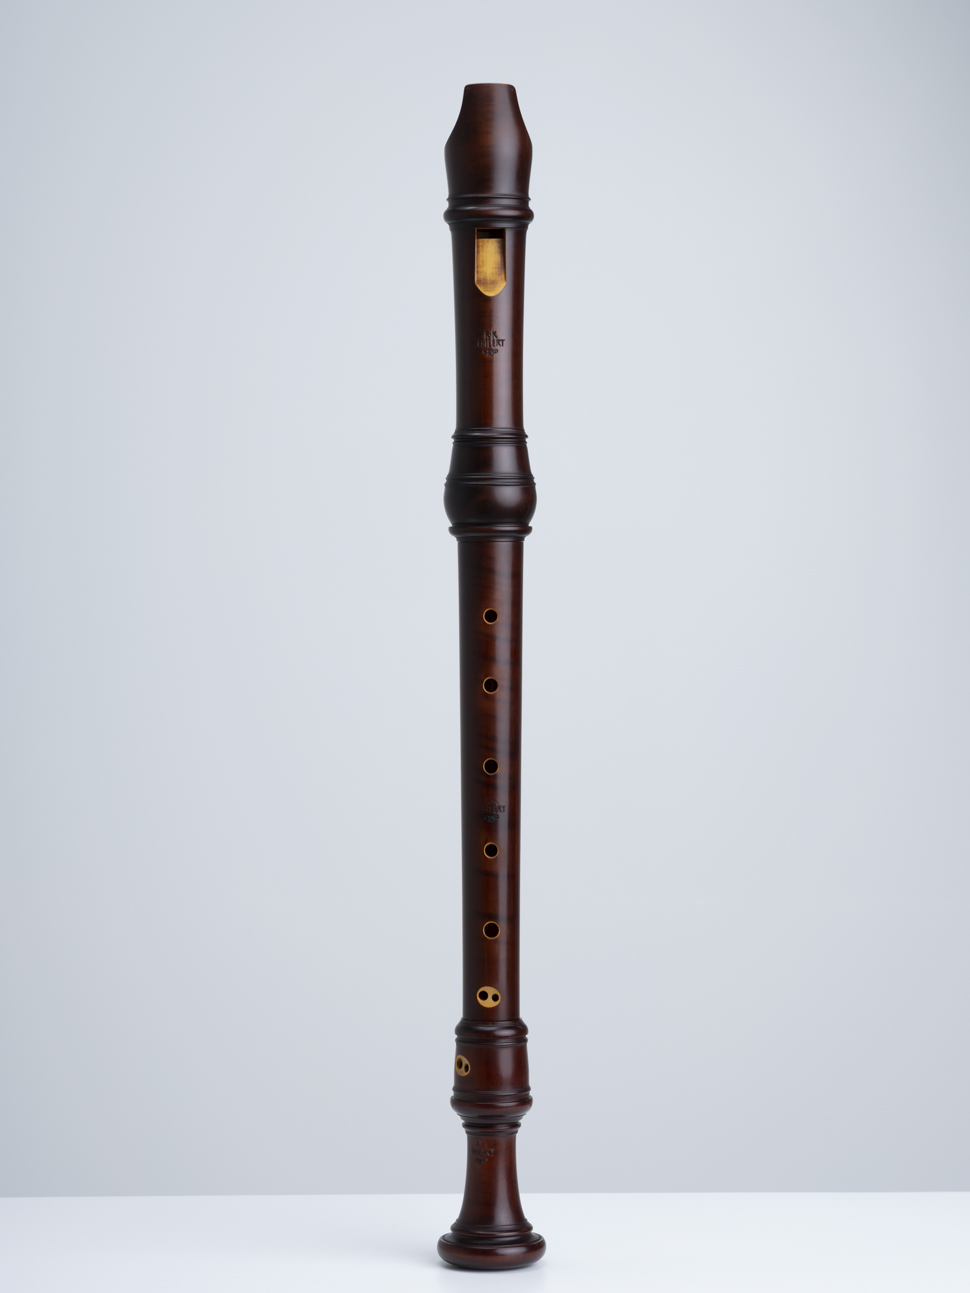 Baroque alto recorder by Ralf Ehlert after Bressan (A = 392 Hz) \u2014 Recorders for Sale